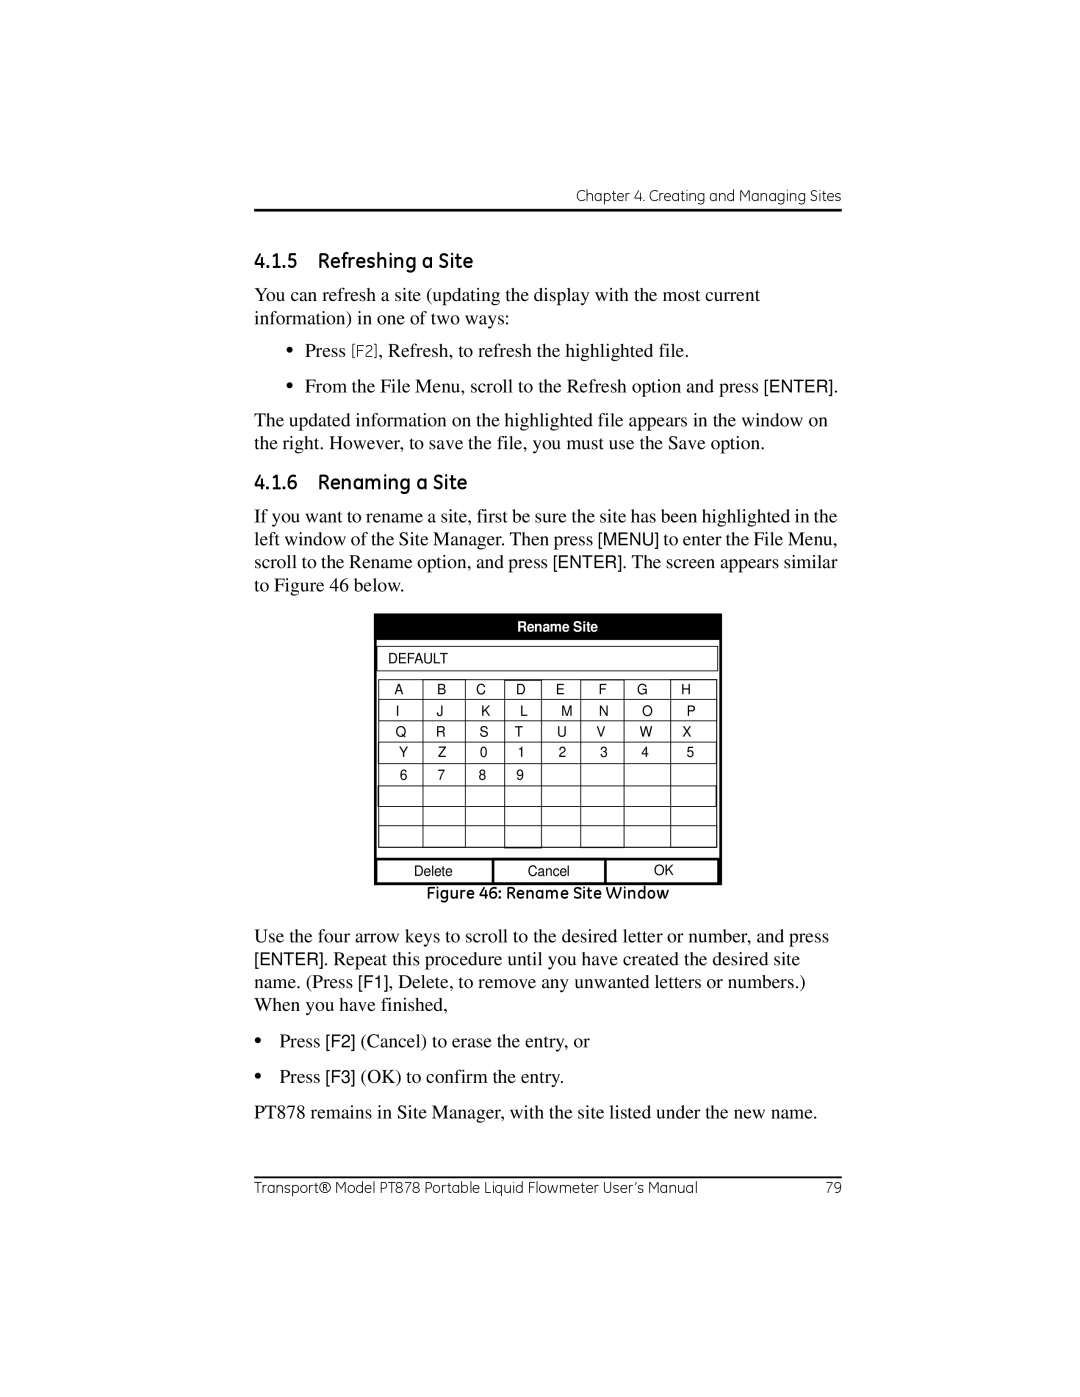 GE PT878 user manual Refreshing a Site, Renaming a Site 